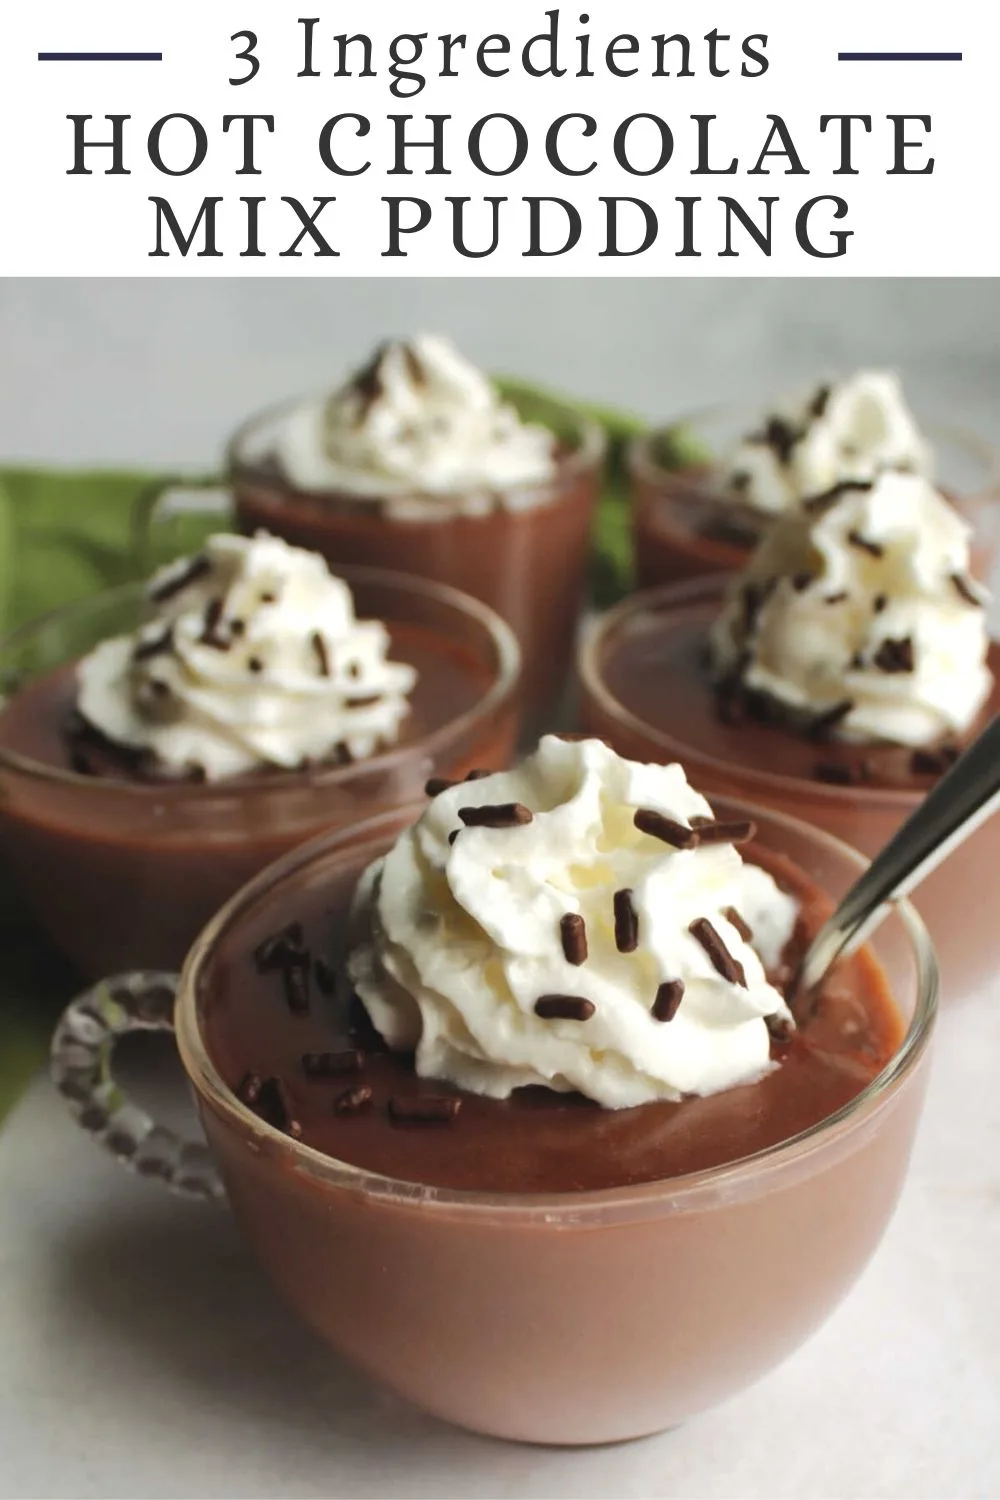 Turn extra hot chocolate mix into an easy and creamy hot chocolate pudding. This recipe only requires 3 ingredients (4 if you count the water) and is ready in less than 10 minutes.